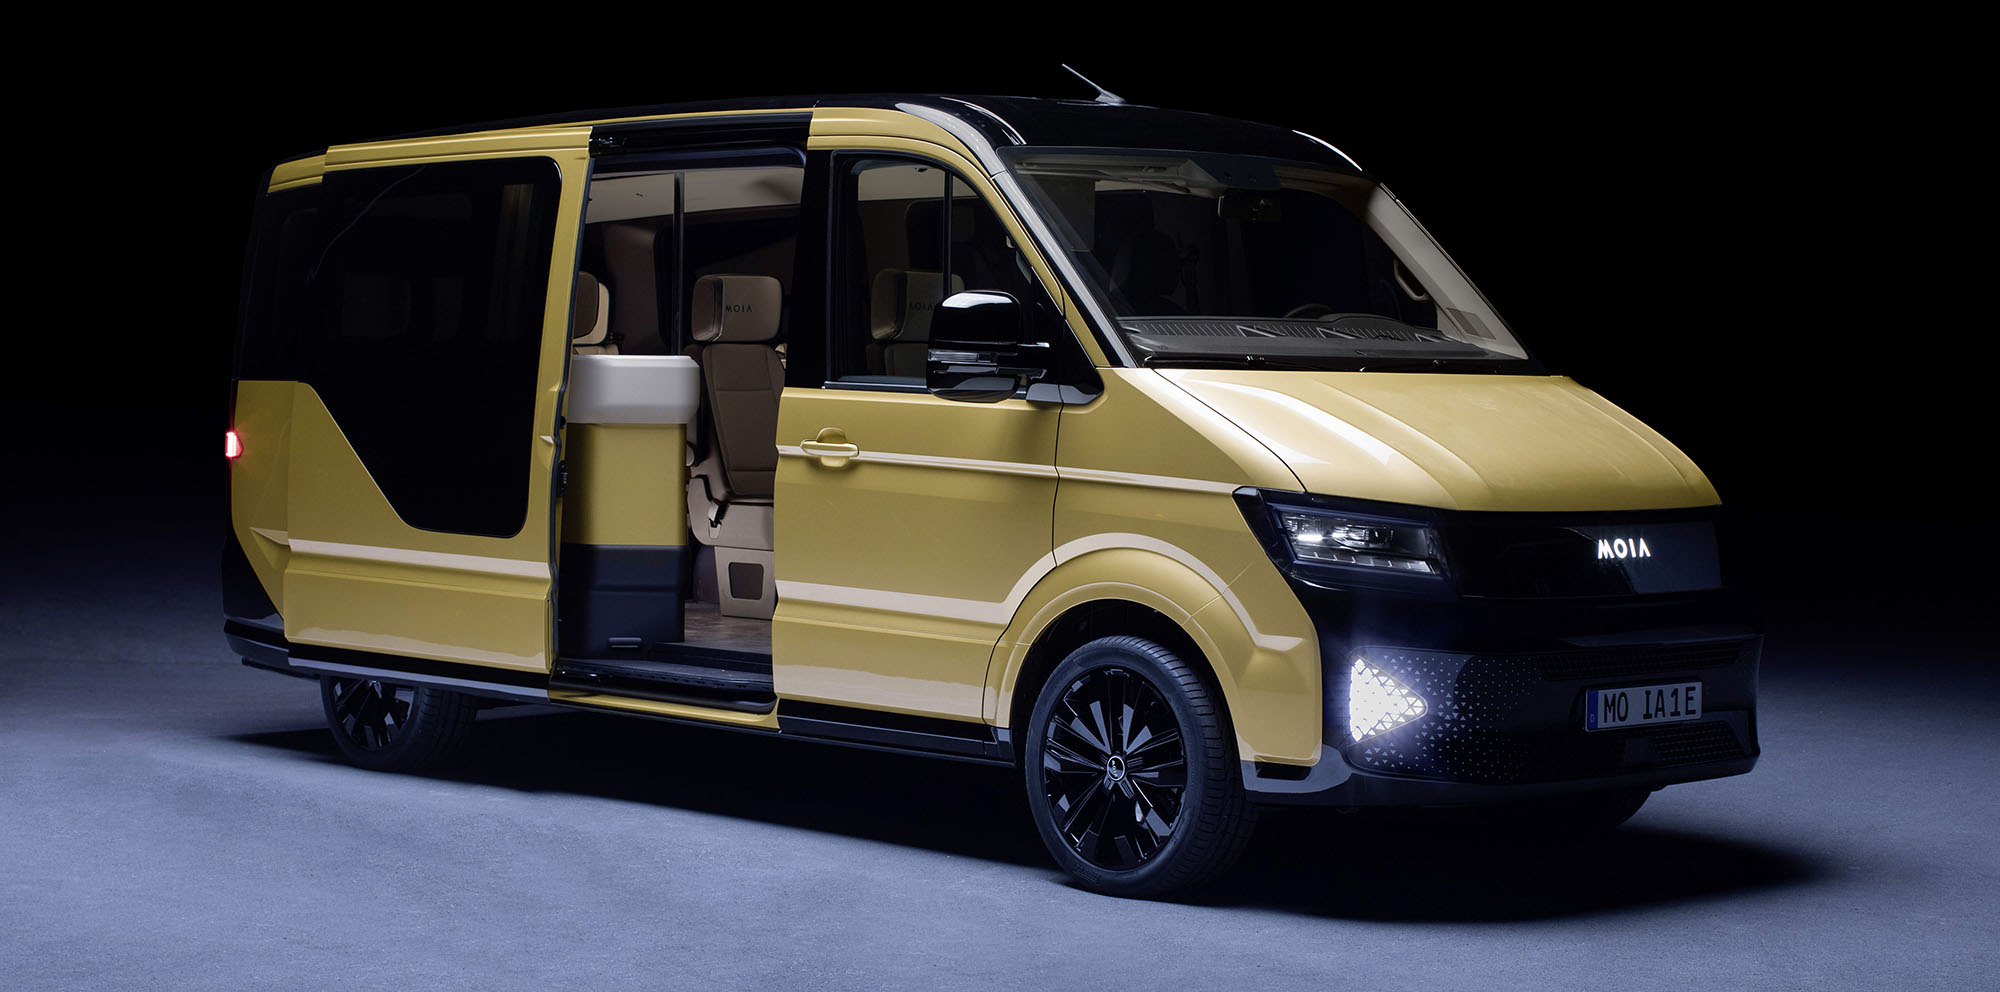 Volkswagen MOIA electric ride sharing concept unveiled 